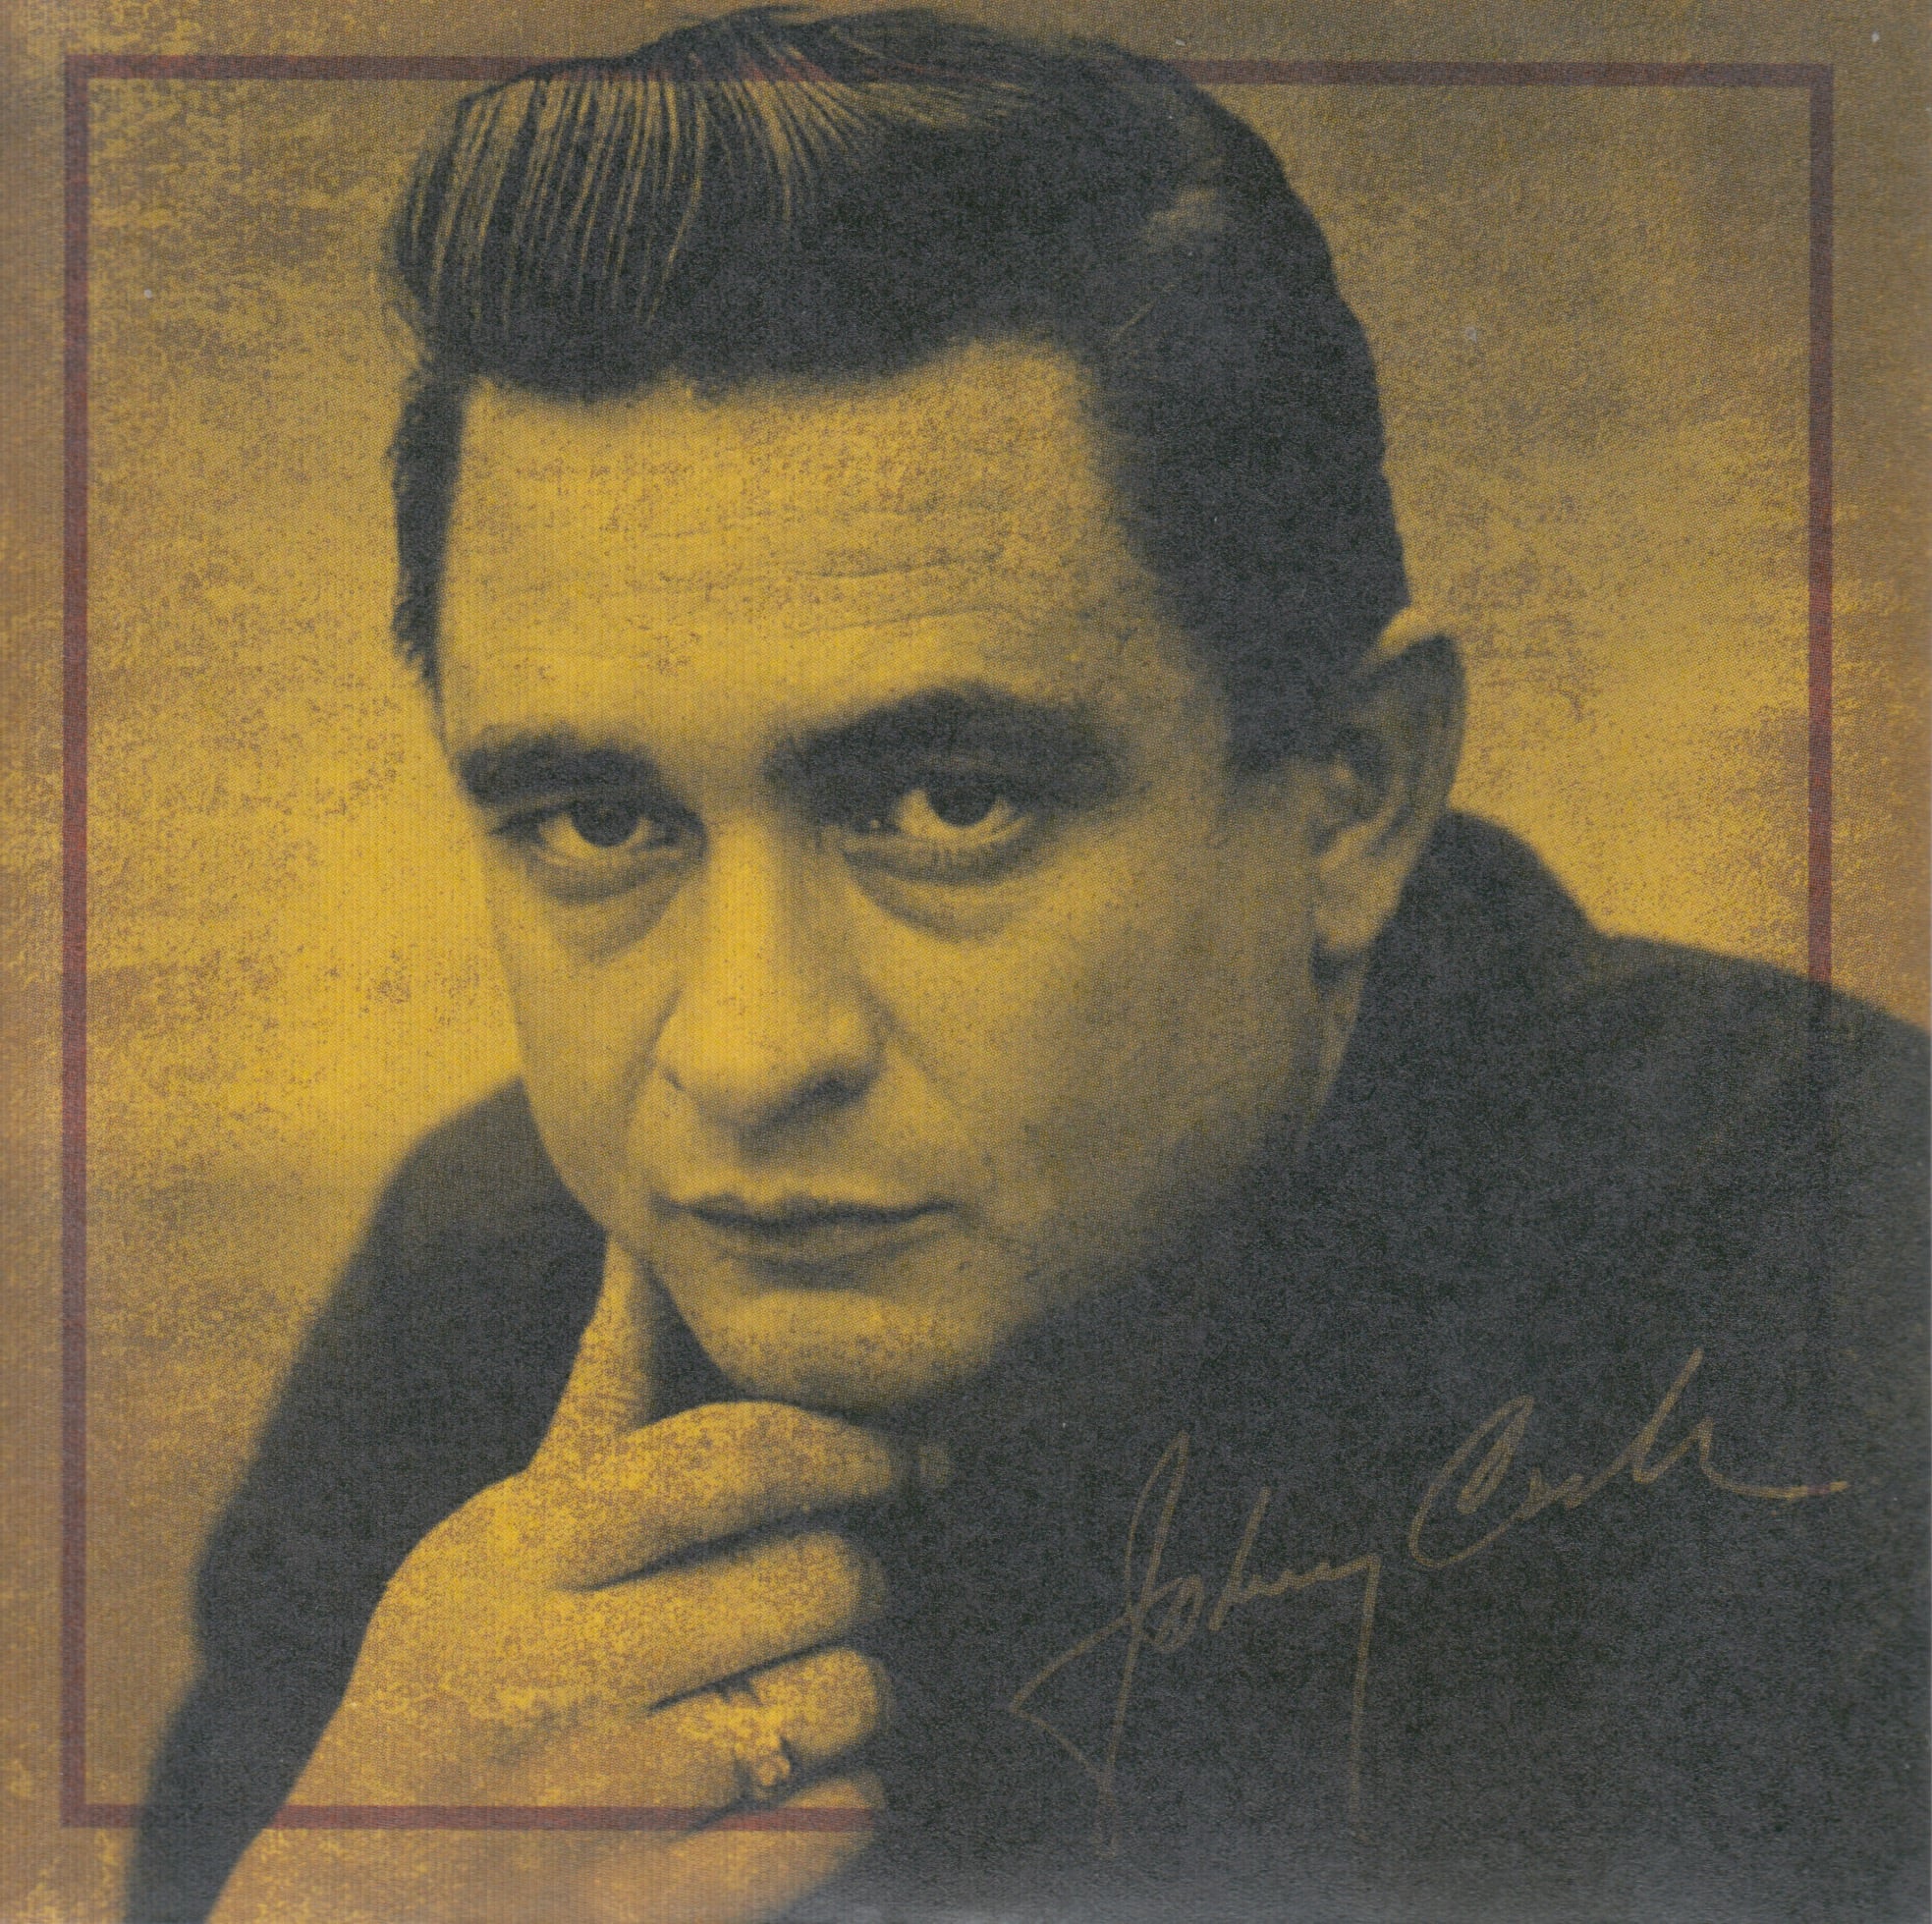 Johnny Cash - Cry! Cry! Cry! (Single Sided) - 3´